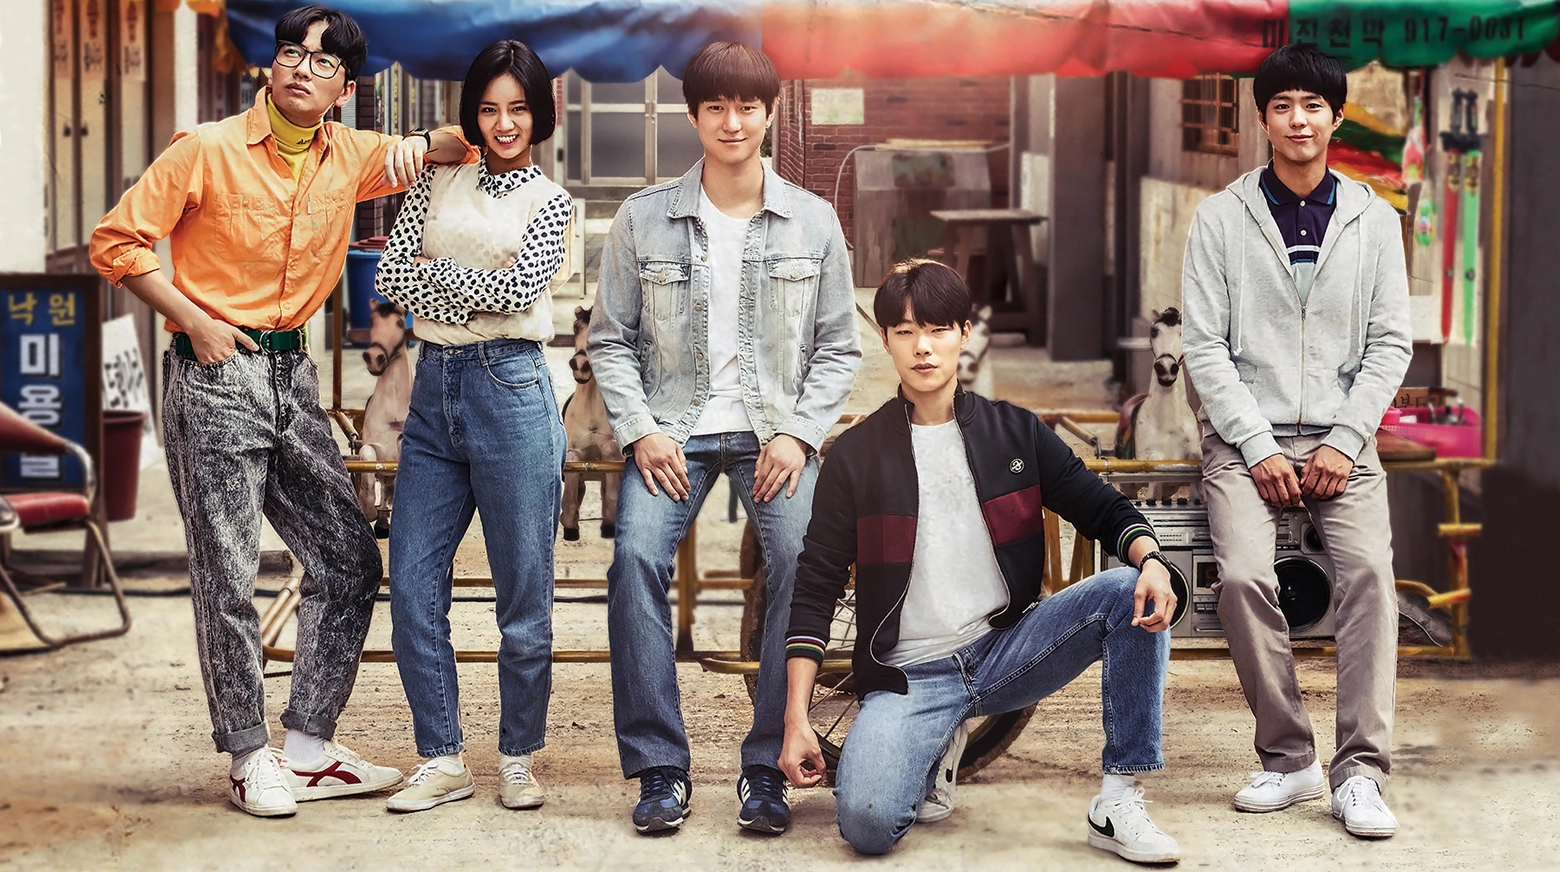 Main cast of the show, Reply 1988.